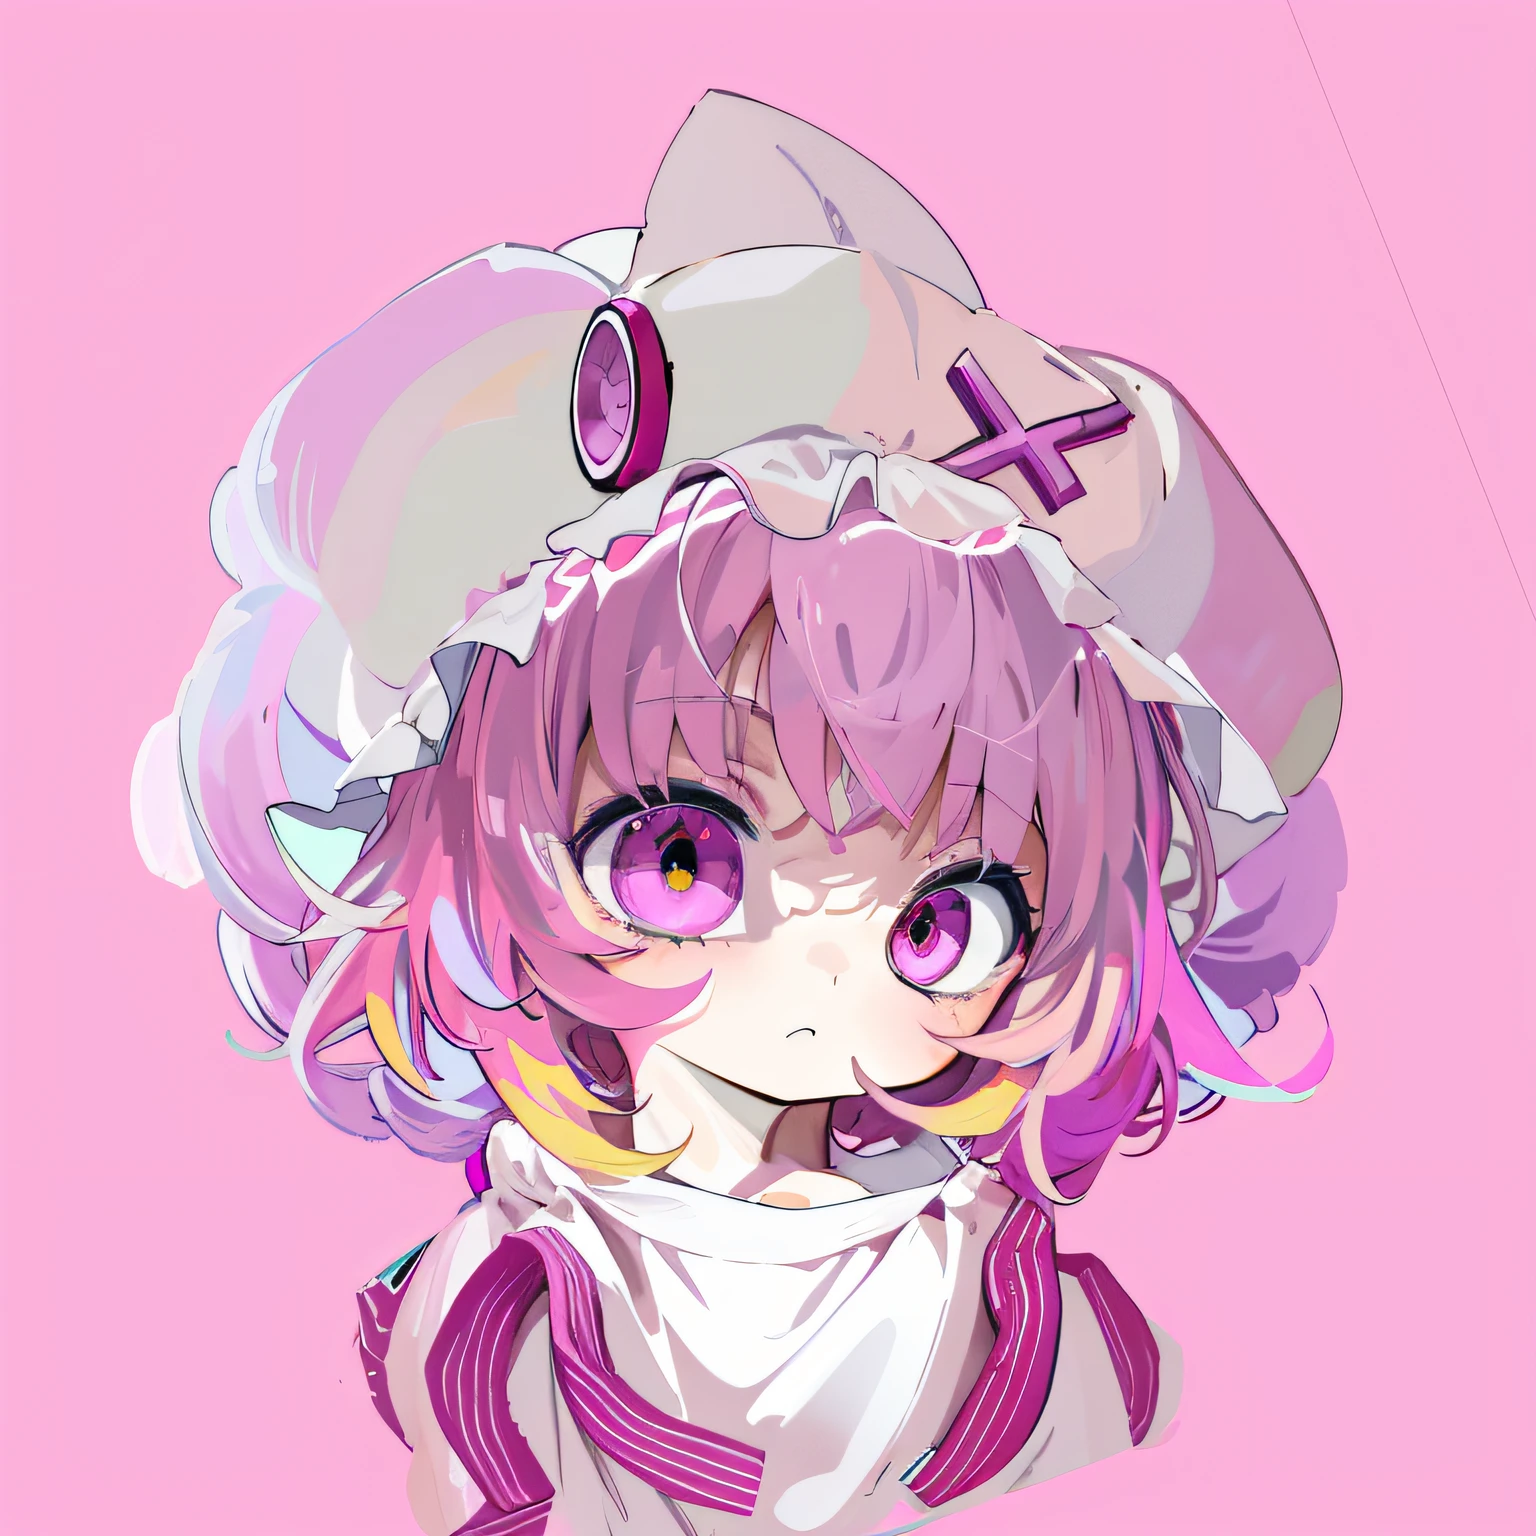 Anime girl with pink hair and white hat, anime moe art style, humanoid pink female squid girl, from touhou, shalltear from overlord, gapmoe yandere, big pink eyes, touhou character, anime art style, Anime Stylization, cute anime face, cute character, (Anime girl), made with anime painter studio, pink face